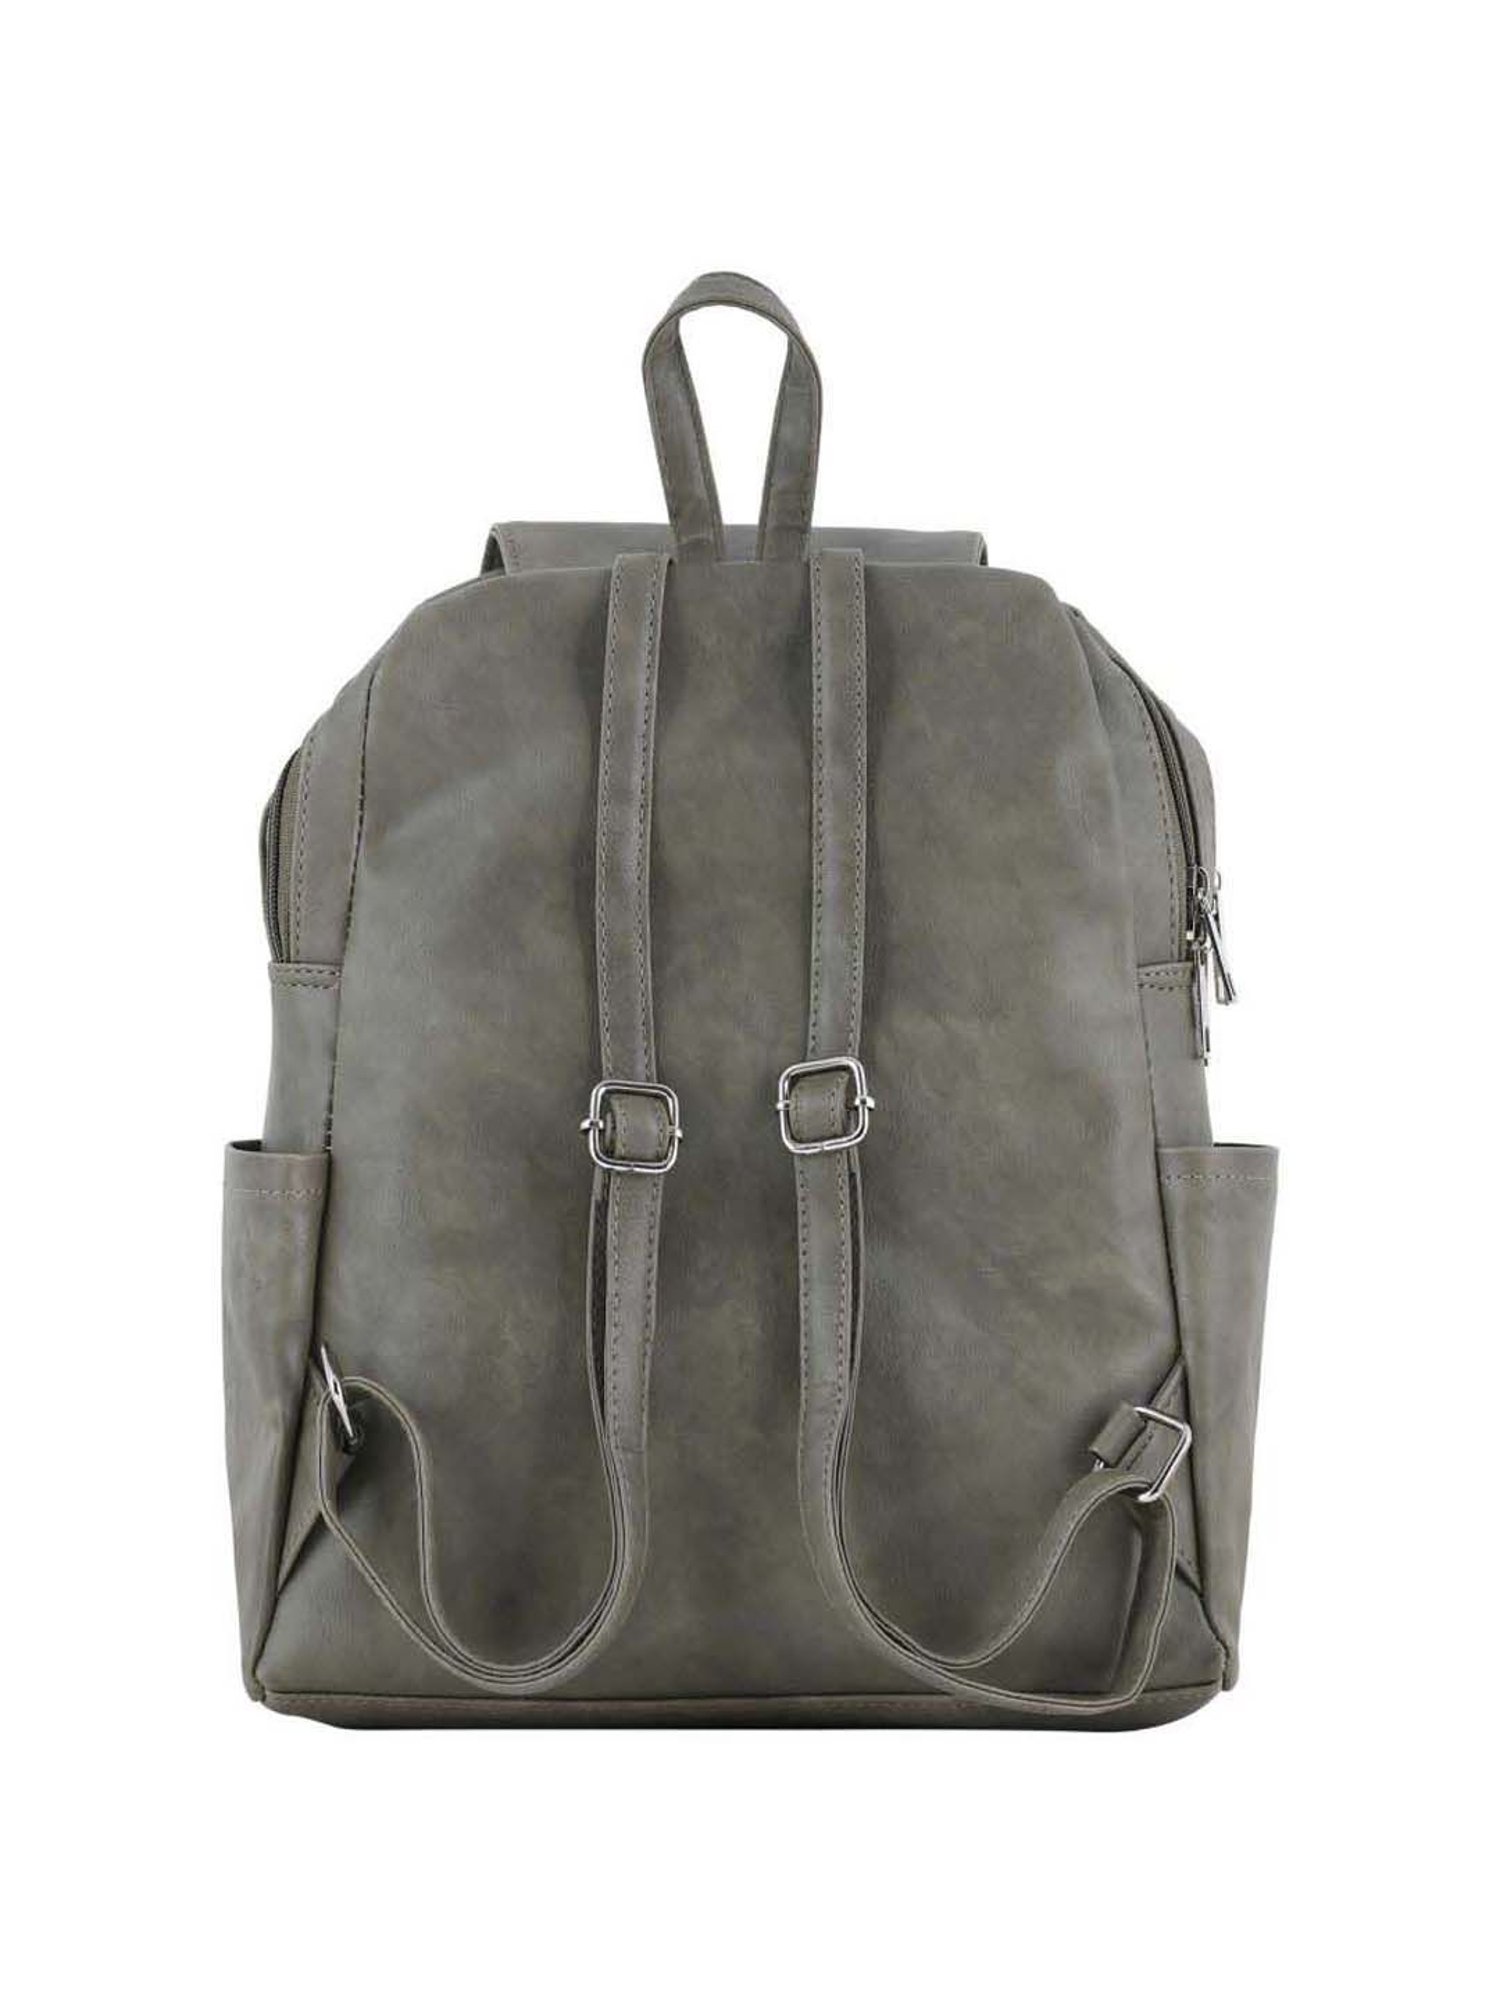 Florence Leather Backpack Purse | Overland